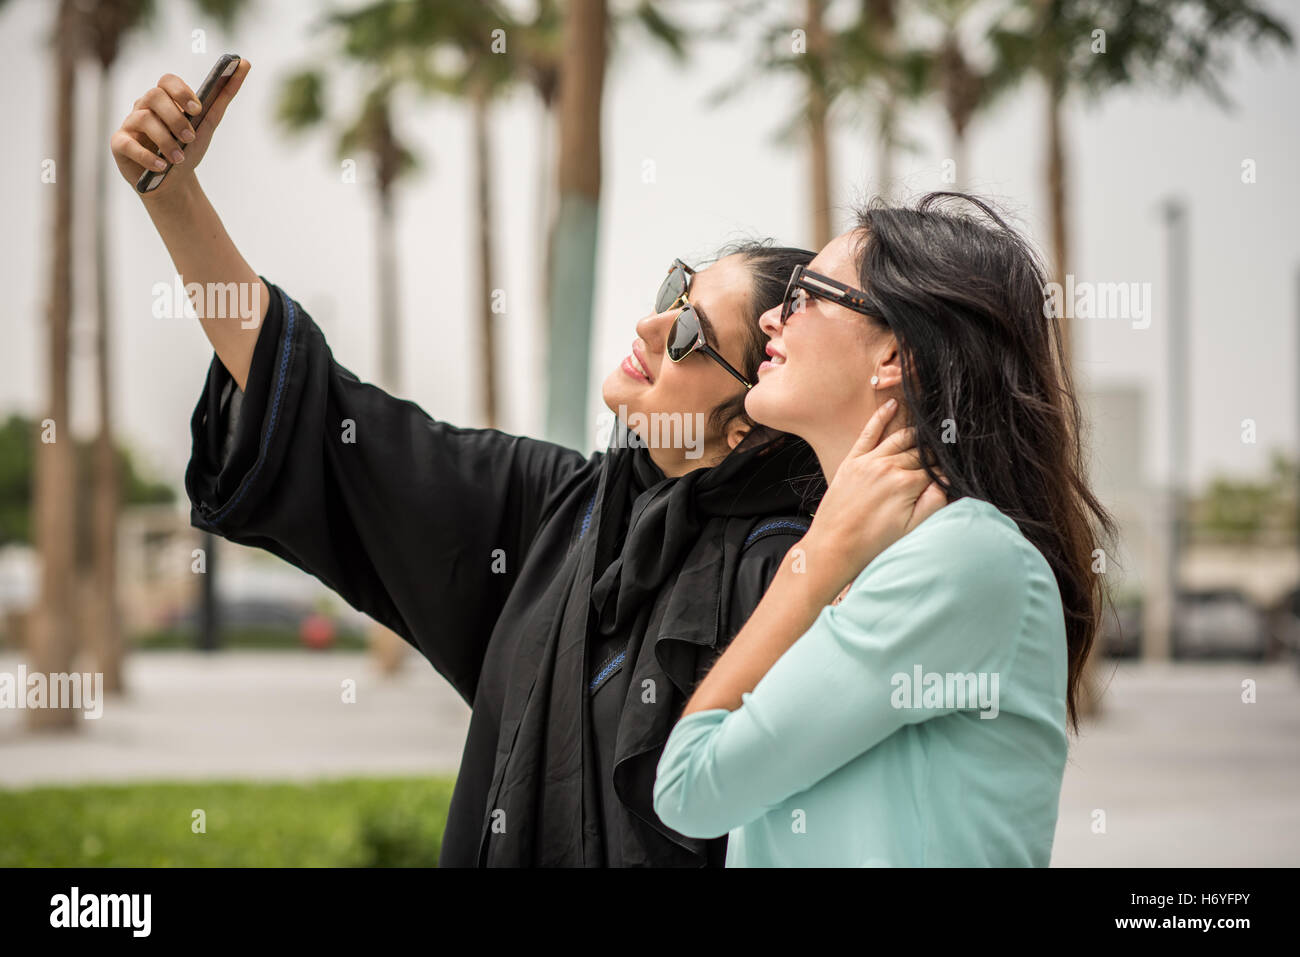 Young middle eastern woman wearing traditional clothing taking smartphone selfie with female friend, Dubai, United Arab Emirates Stock Photo